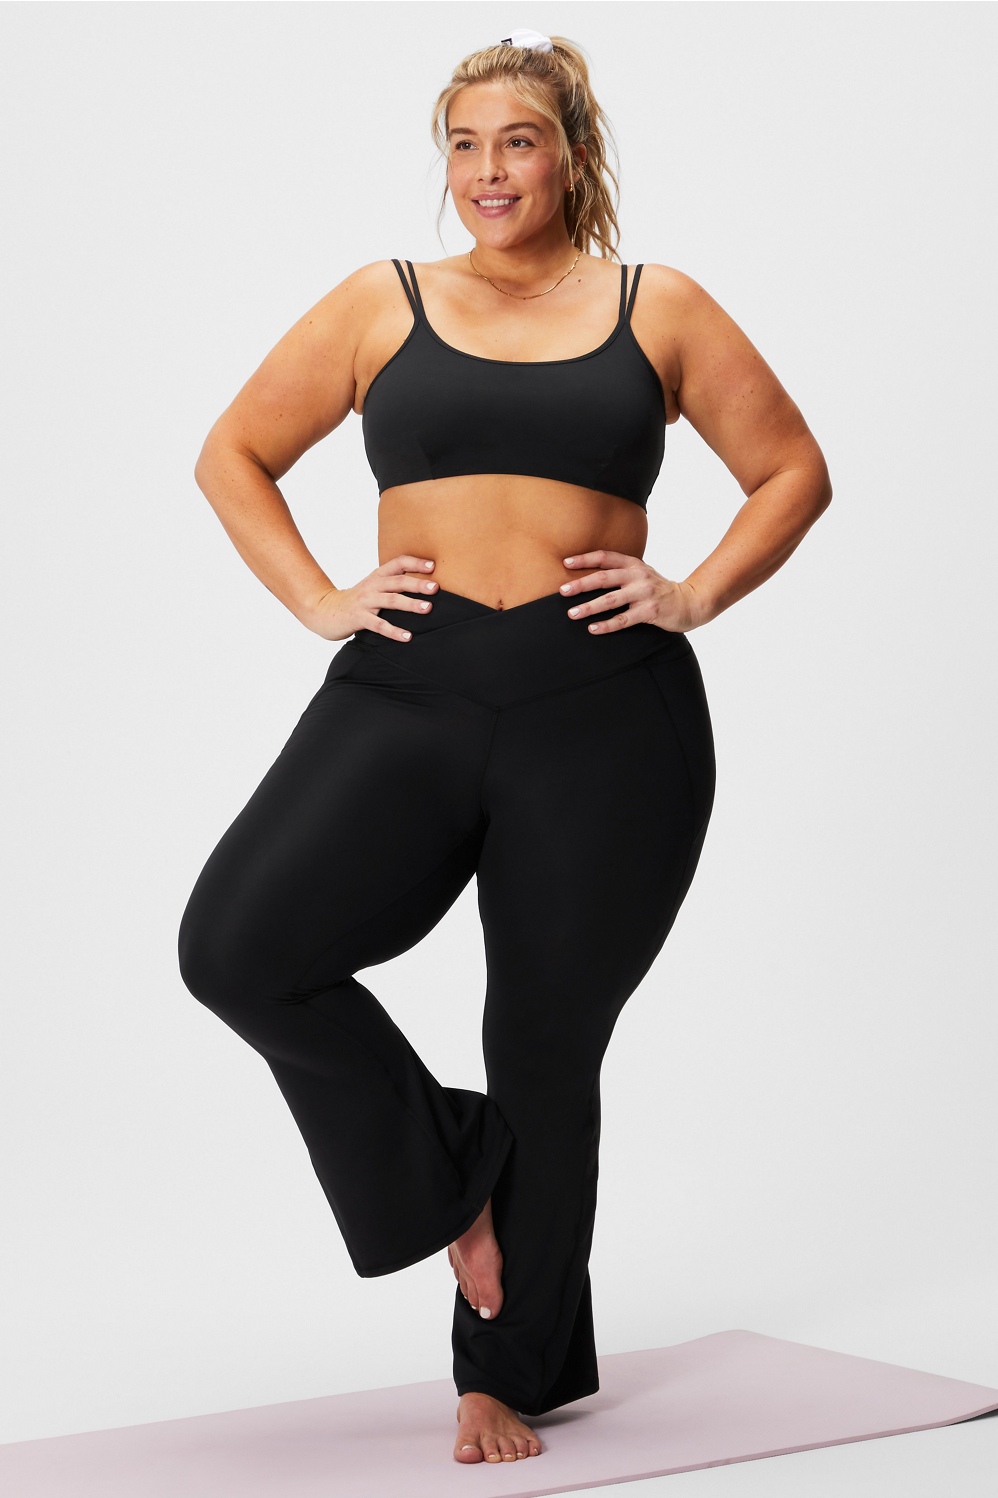 Xersion EverPerform Womens High Rise Plus Yoga Pant